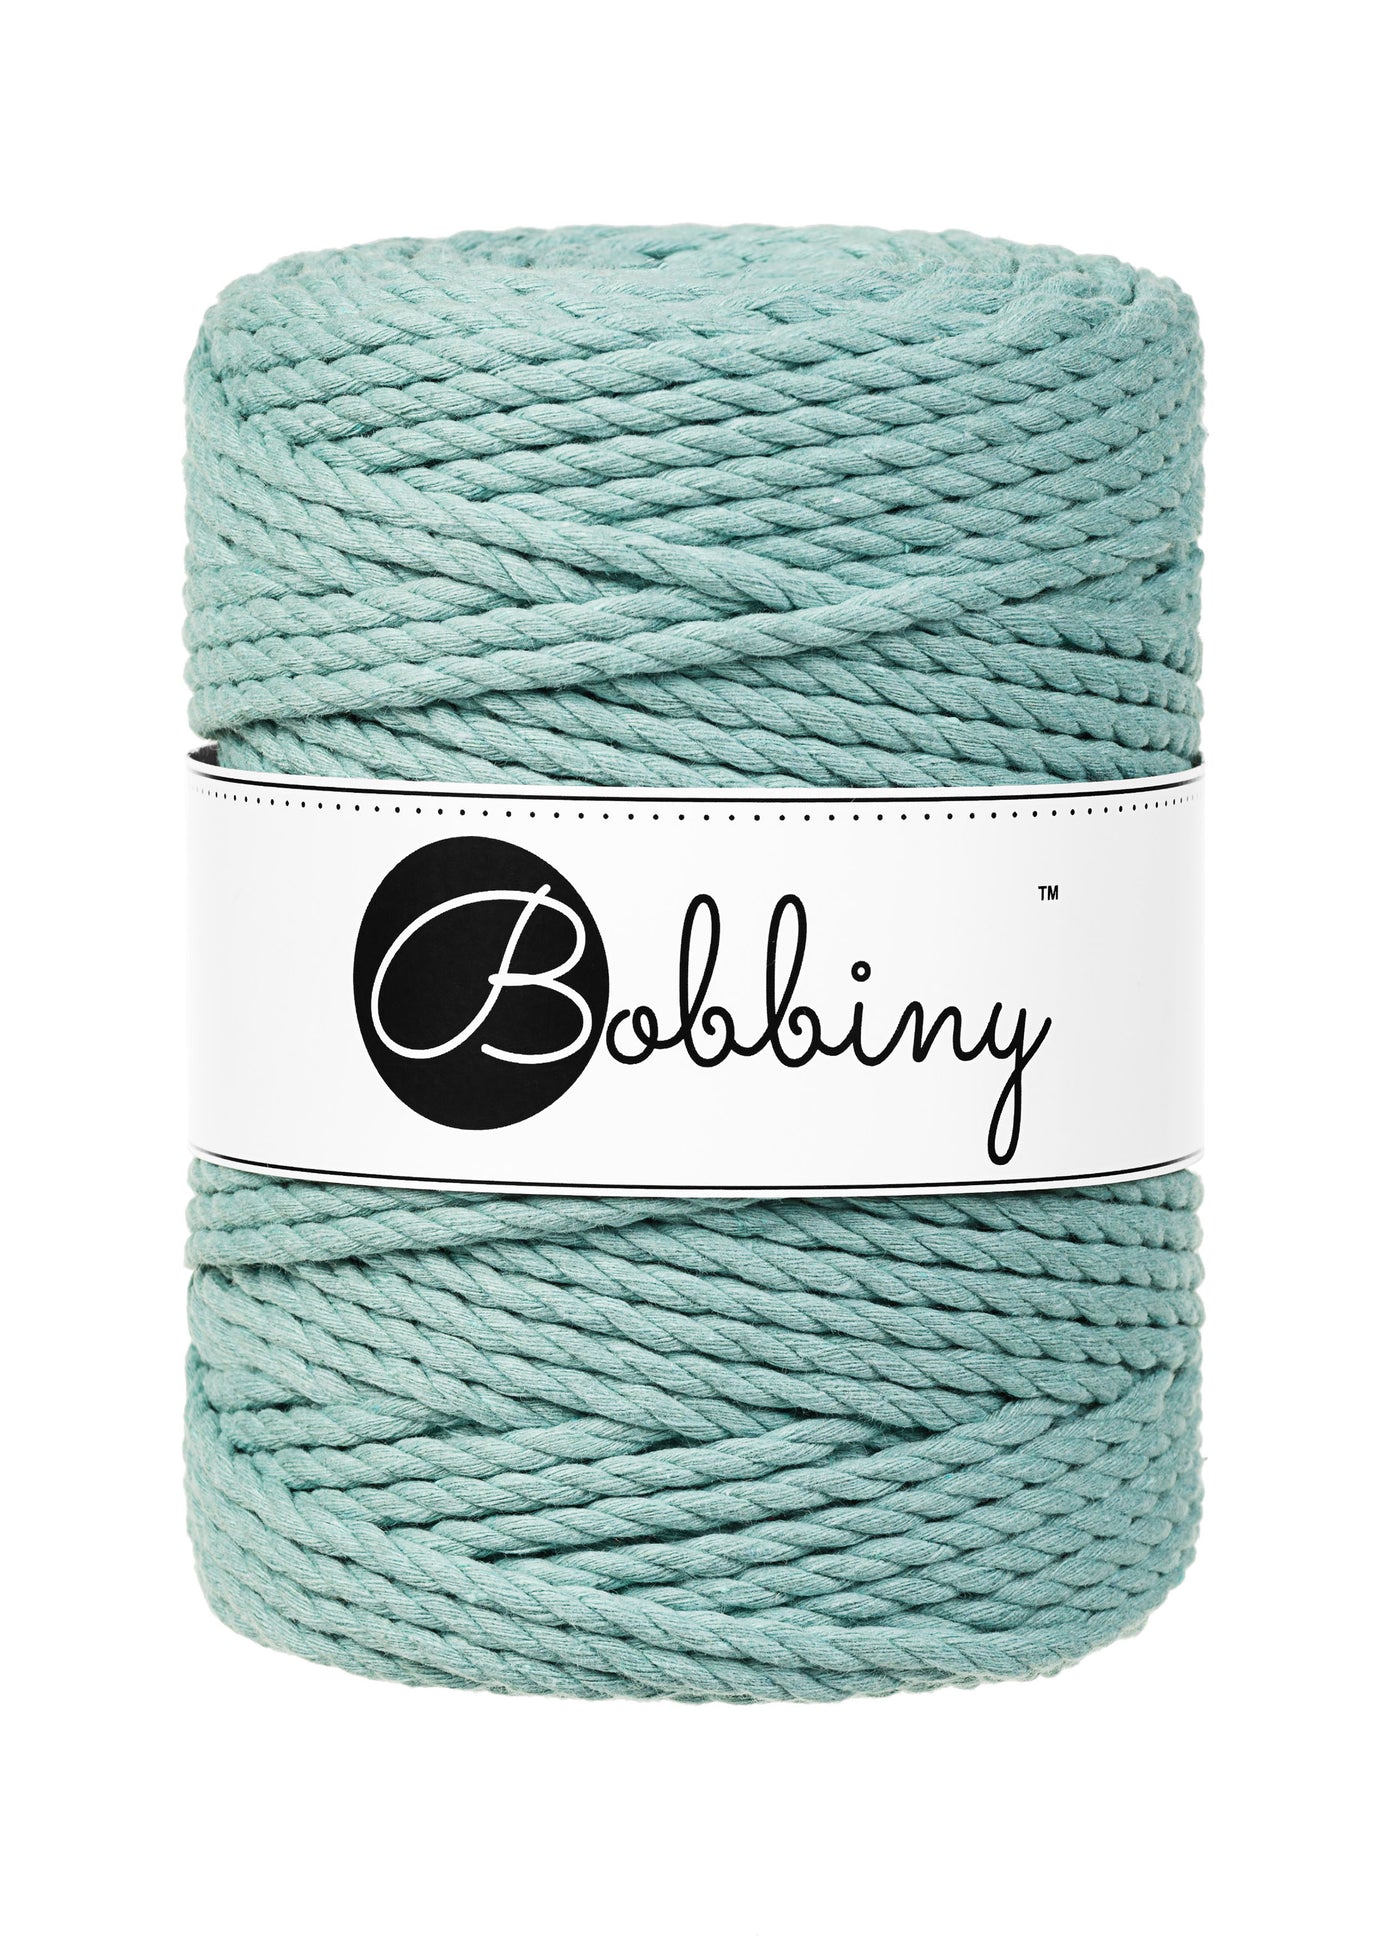 Bobbiny 3ply 5mm rope in duck egg blue shade 